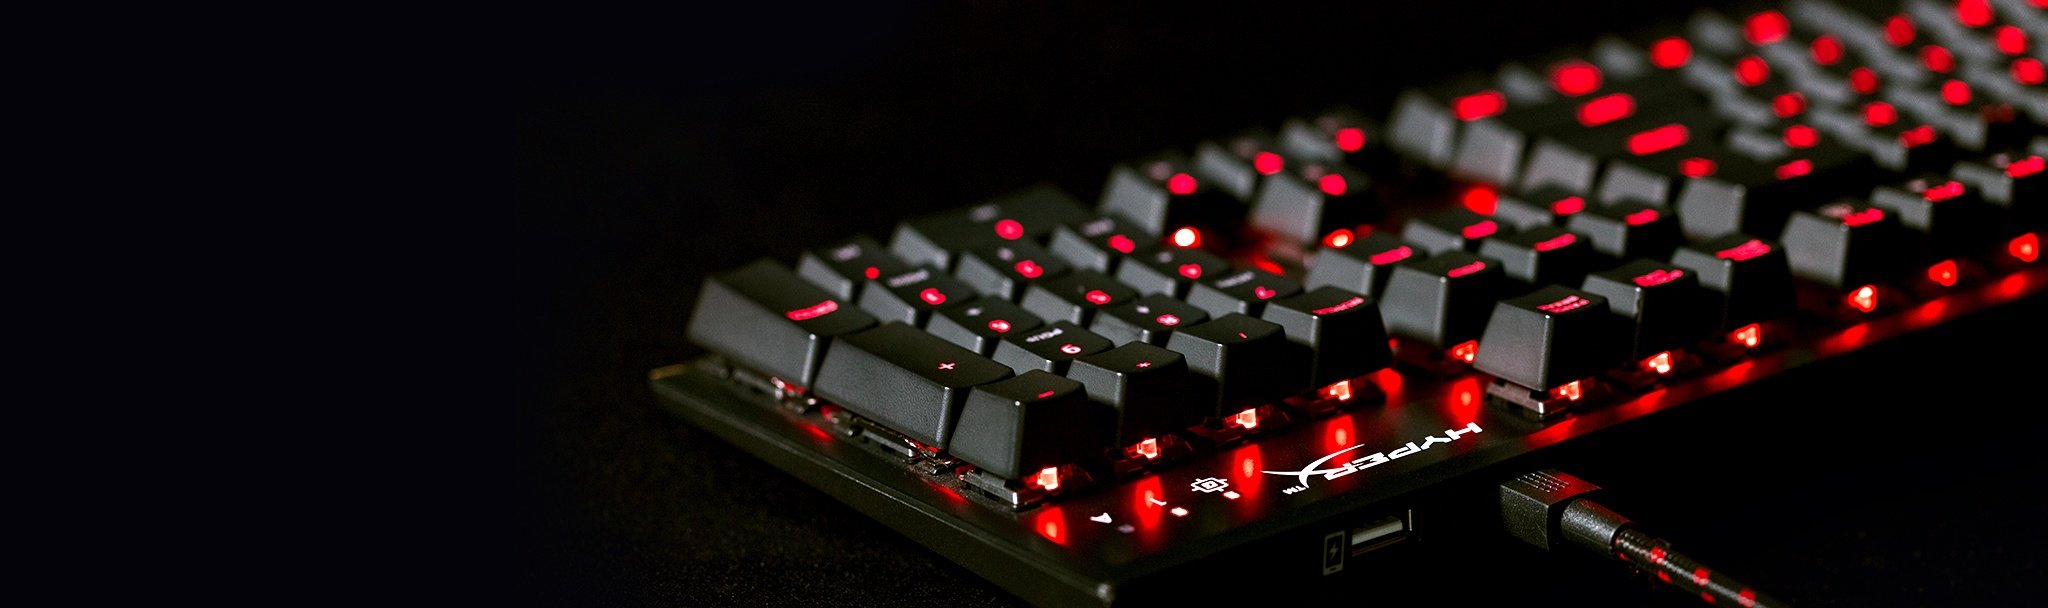 HyperX red backlit keys with dynamic lighting effects